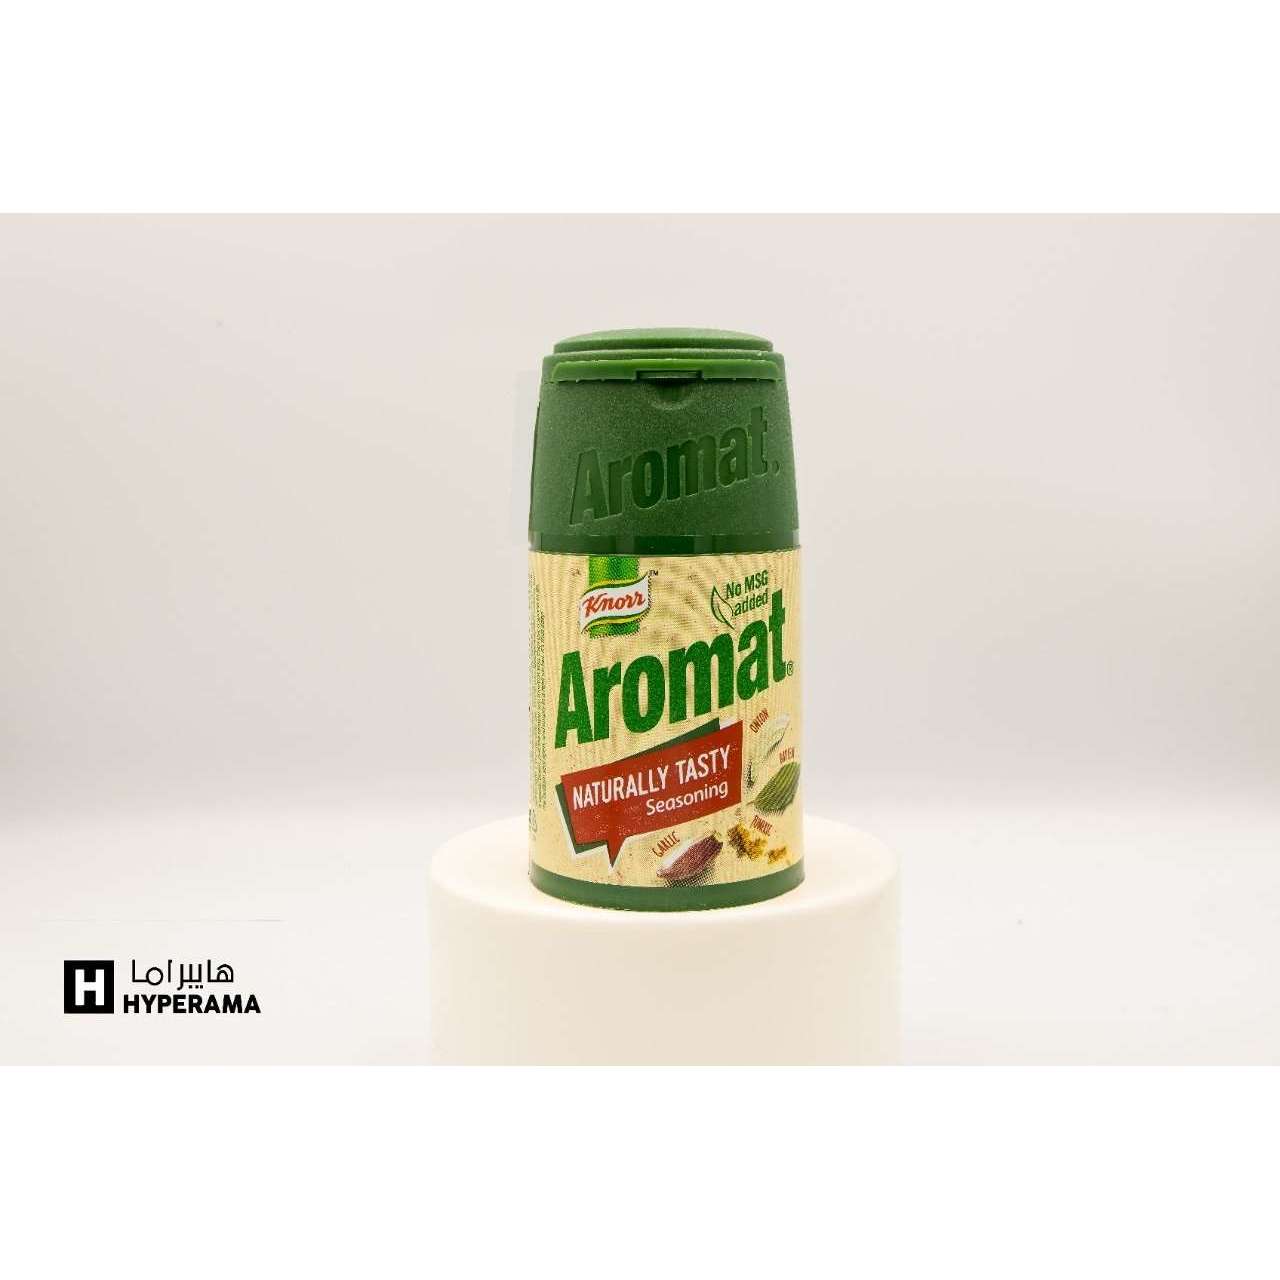 KNORR AROMAT NATURALLY TASTY CANNISTER 75G